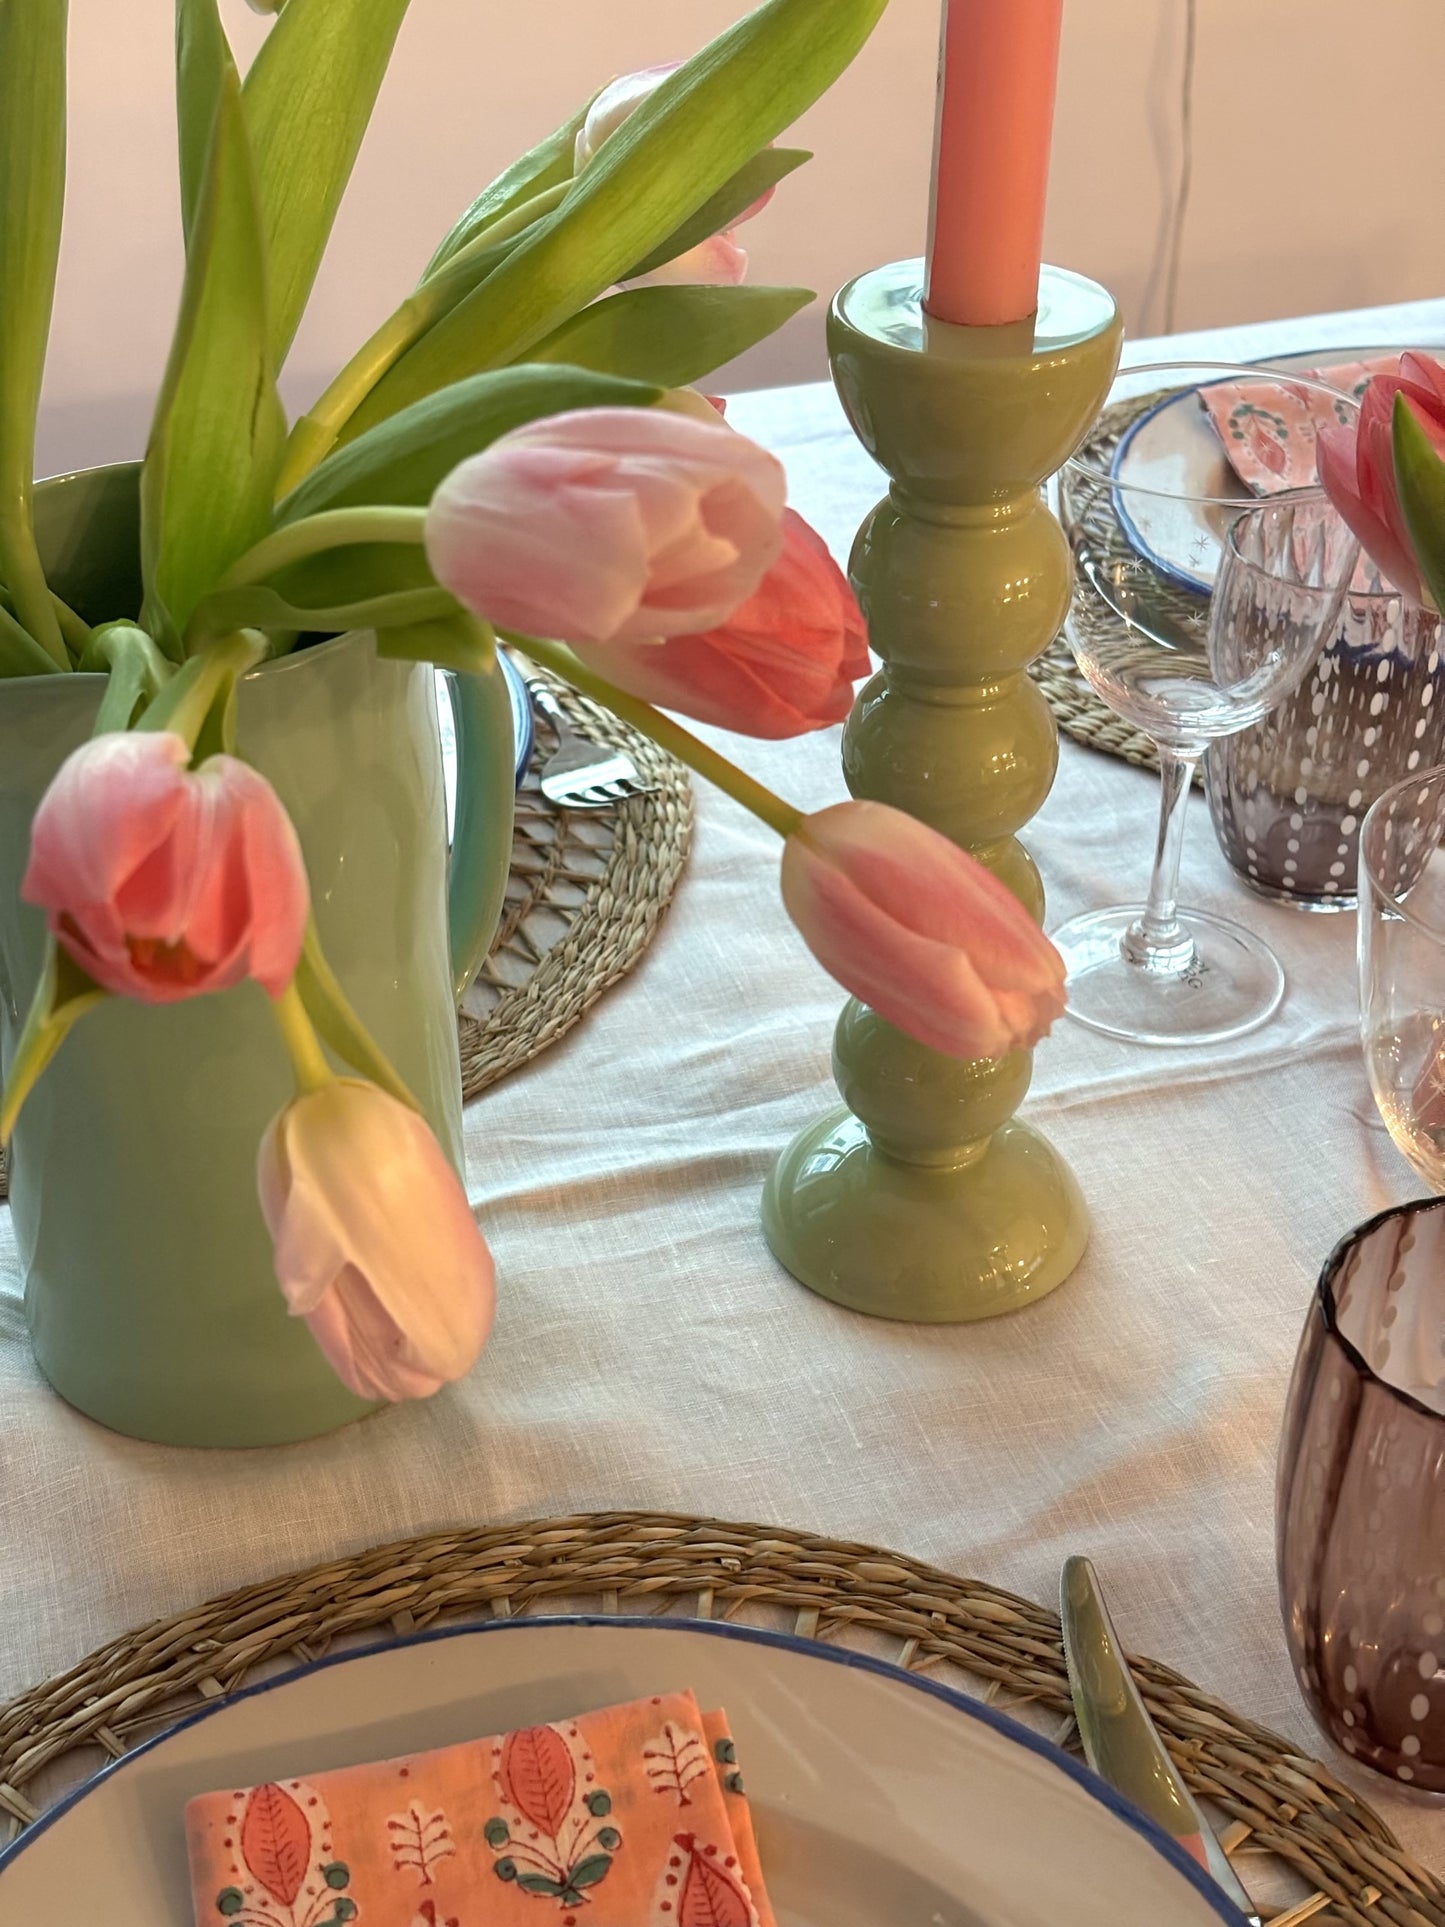 A close up of a sage green bobbin candlestick with a rose candle next to a jug of pink tulips.